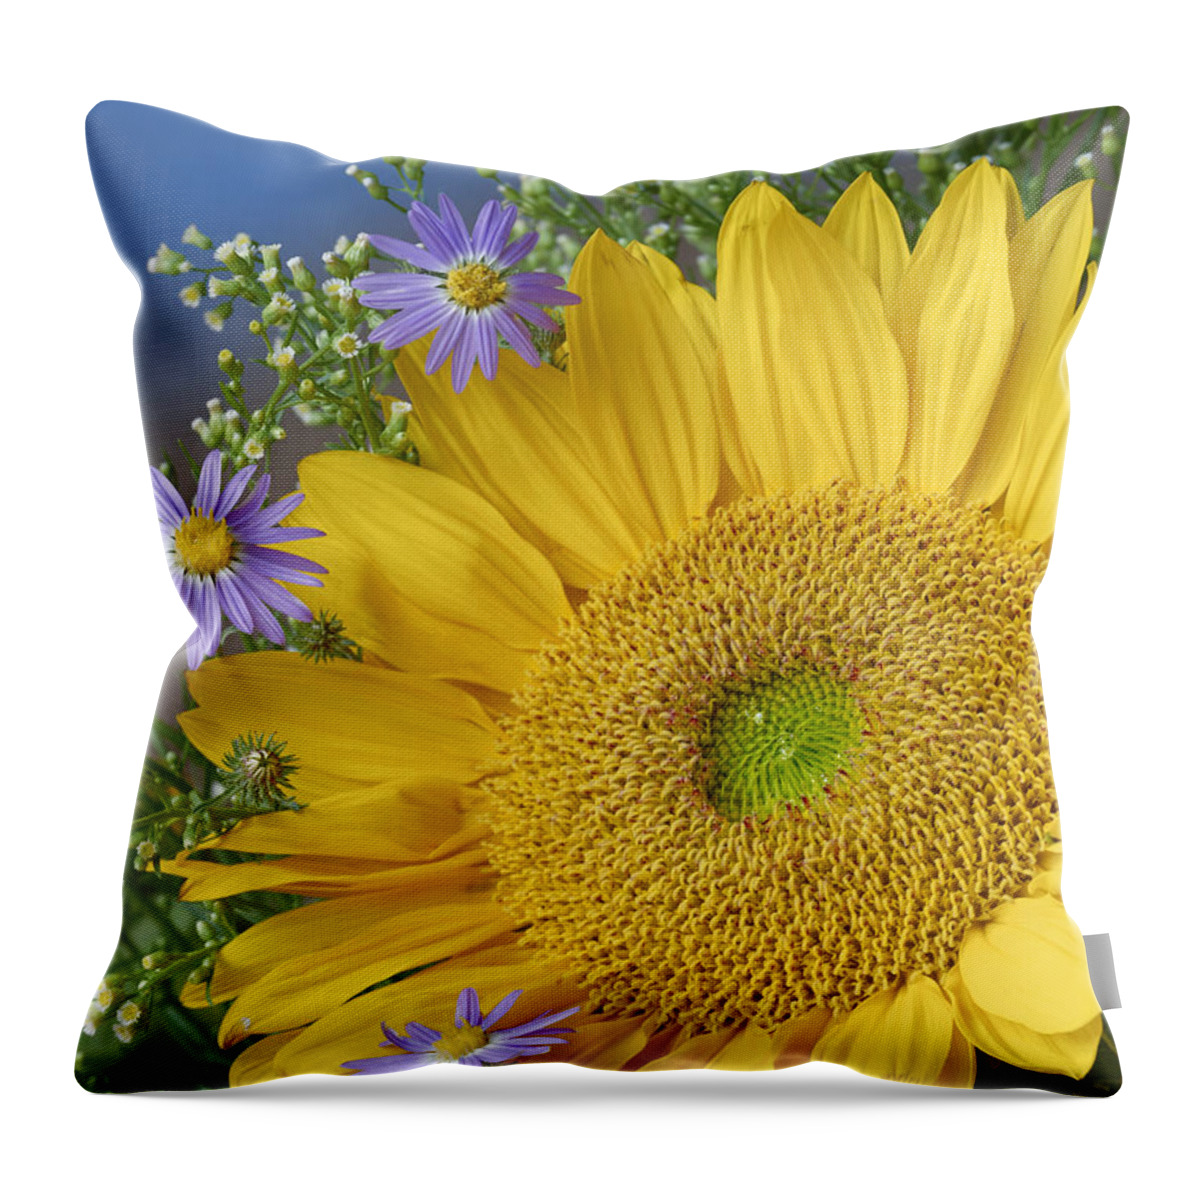 Feb0514 Throw Pillow featuring the photograph Common Sunflower And Asters by Tim Fitzharris